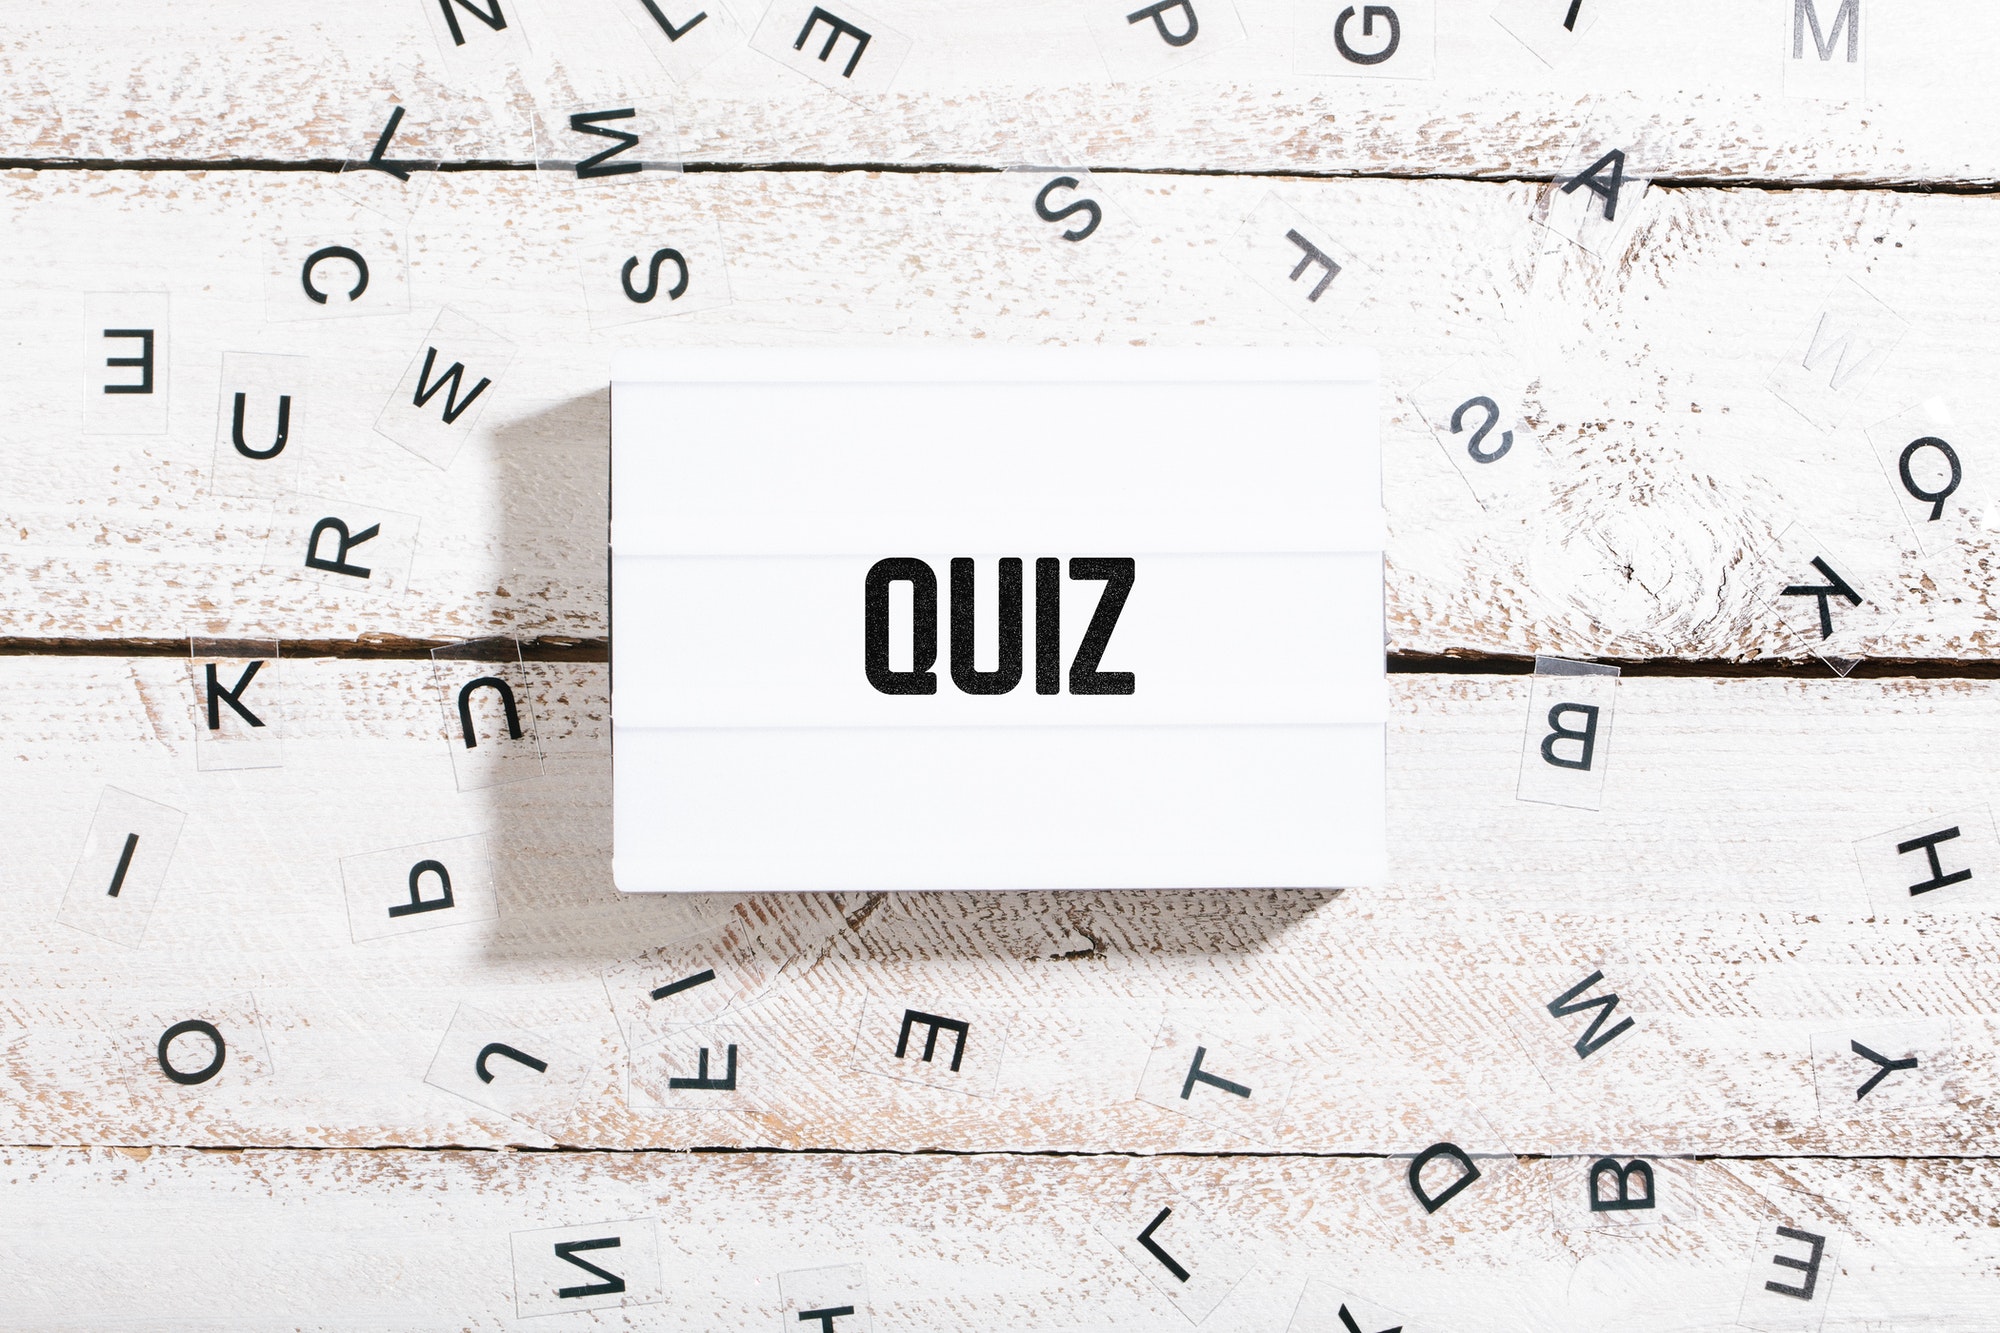 Quiz text on light box with chaos letters on white wood table desk